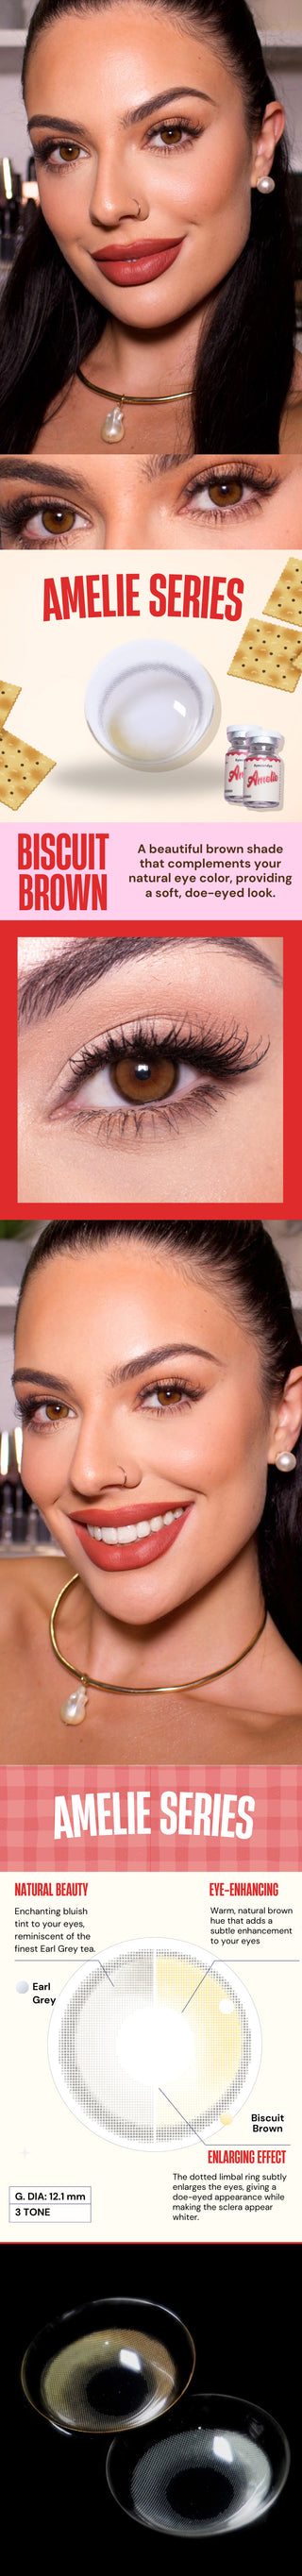 a collage of model image with a natural dark brown eyes wearing the amelie series biscuit brown and a close up eye image and another close up image of the contact lens showing the detail of the same lens. 